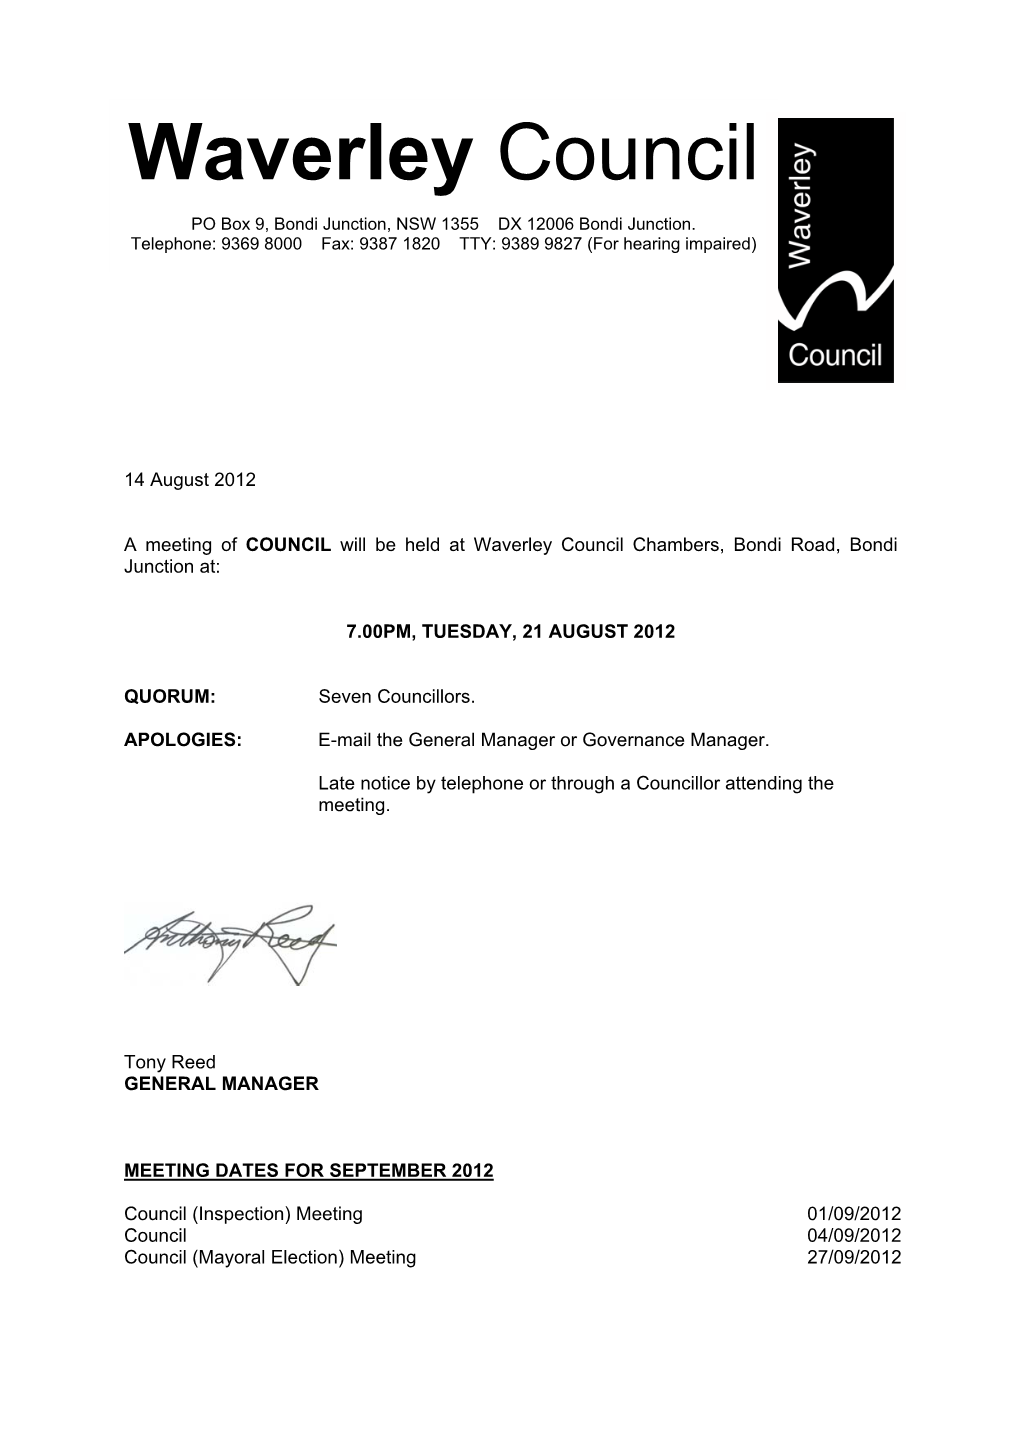 Waverley Council Audit-In-Confidence